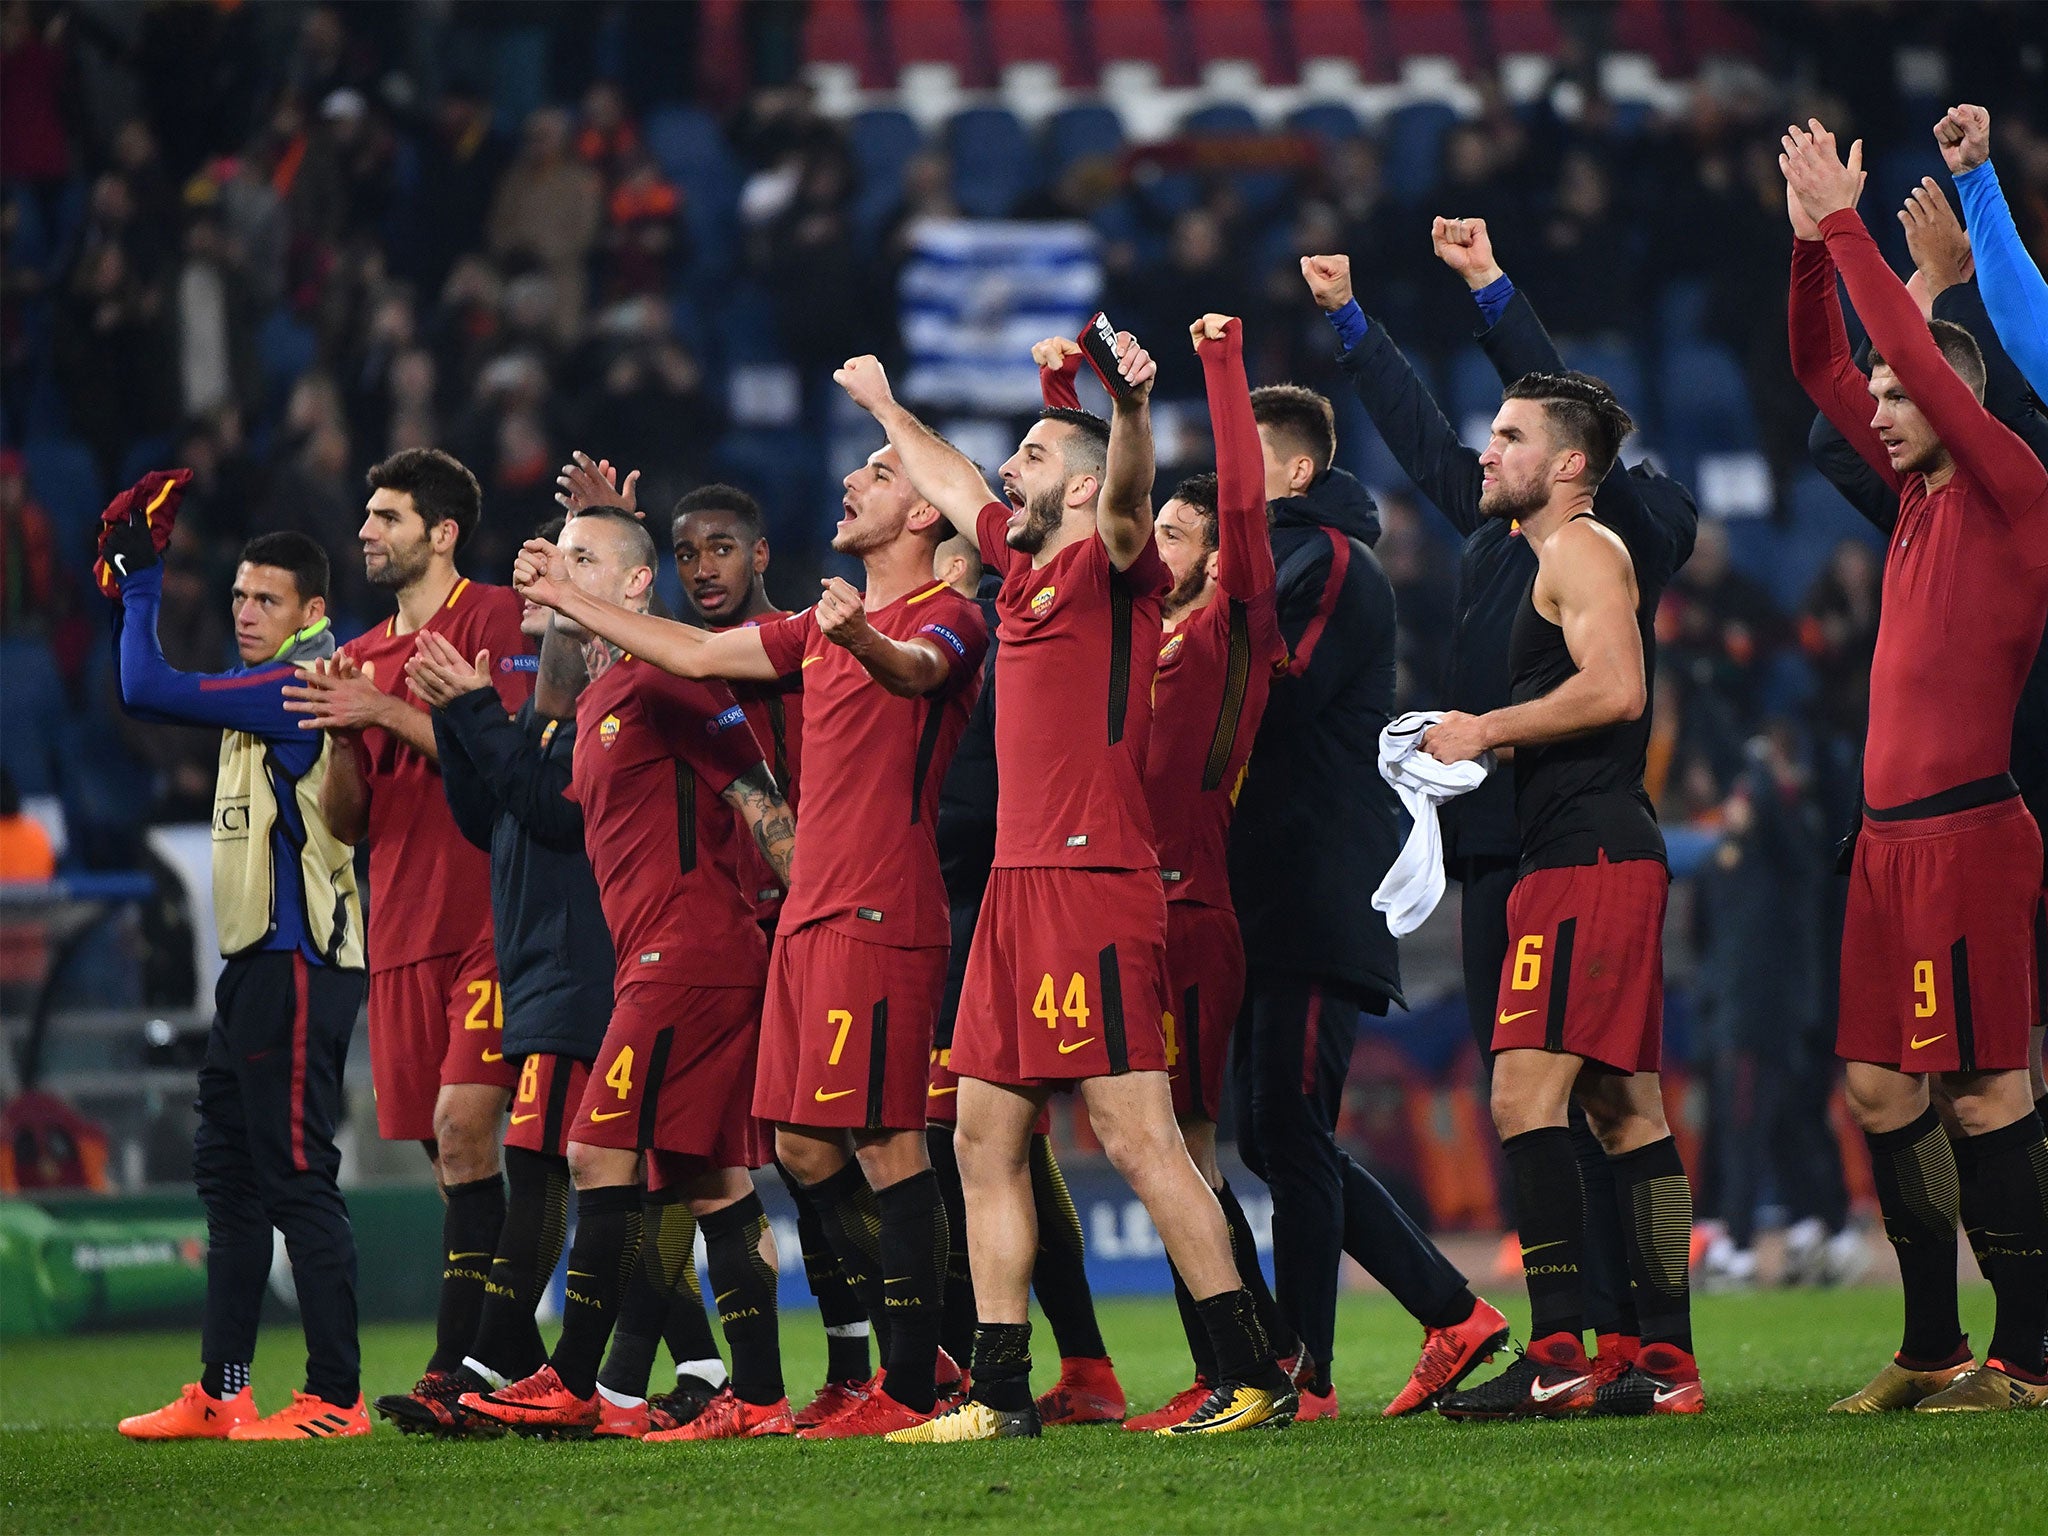 Roma are a club on the rise, boasting progress on and off the field